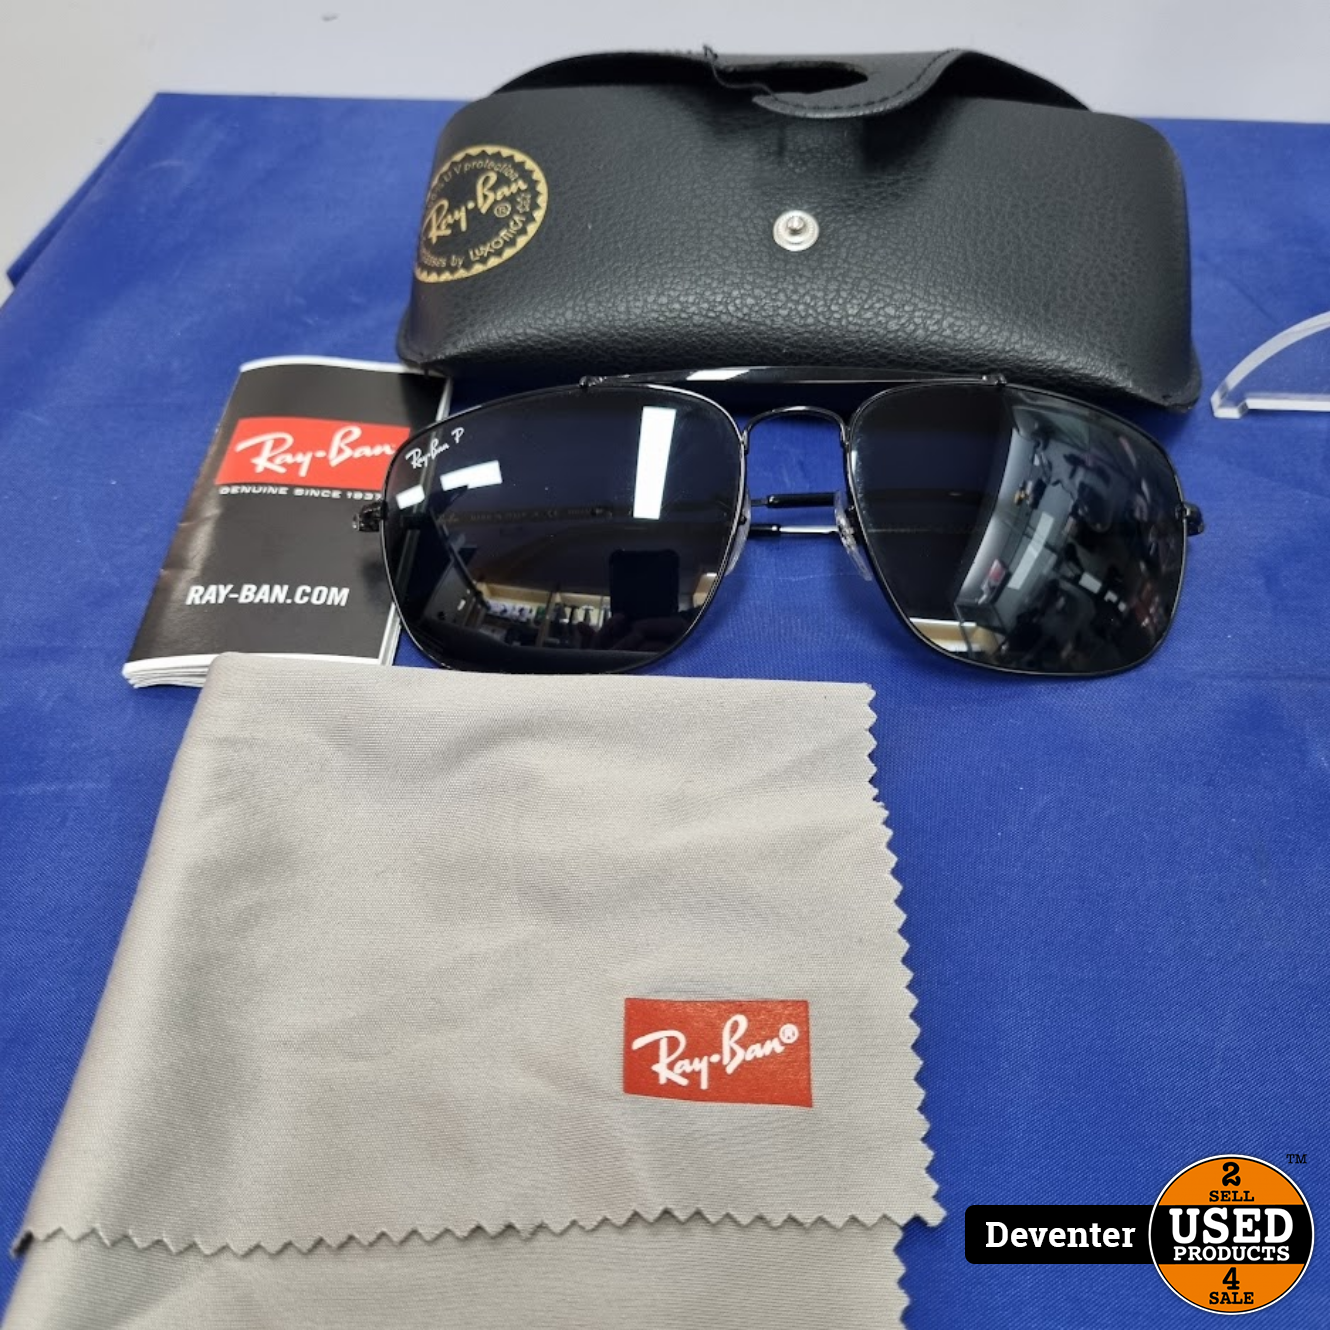 Subjectief Geelachtig nikkel RayBan Ray-Ban RB3560 'The Colonel' Polarized Zonnebril zwart - Used  Products Deventer